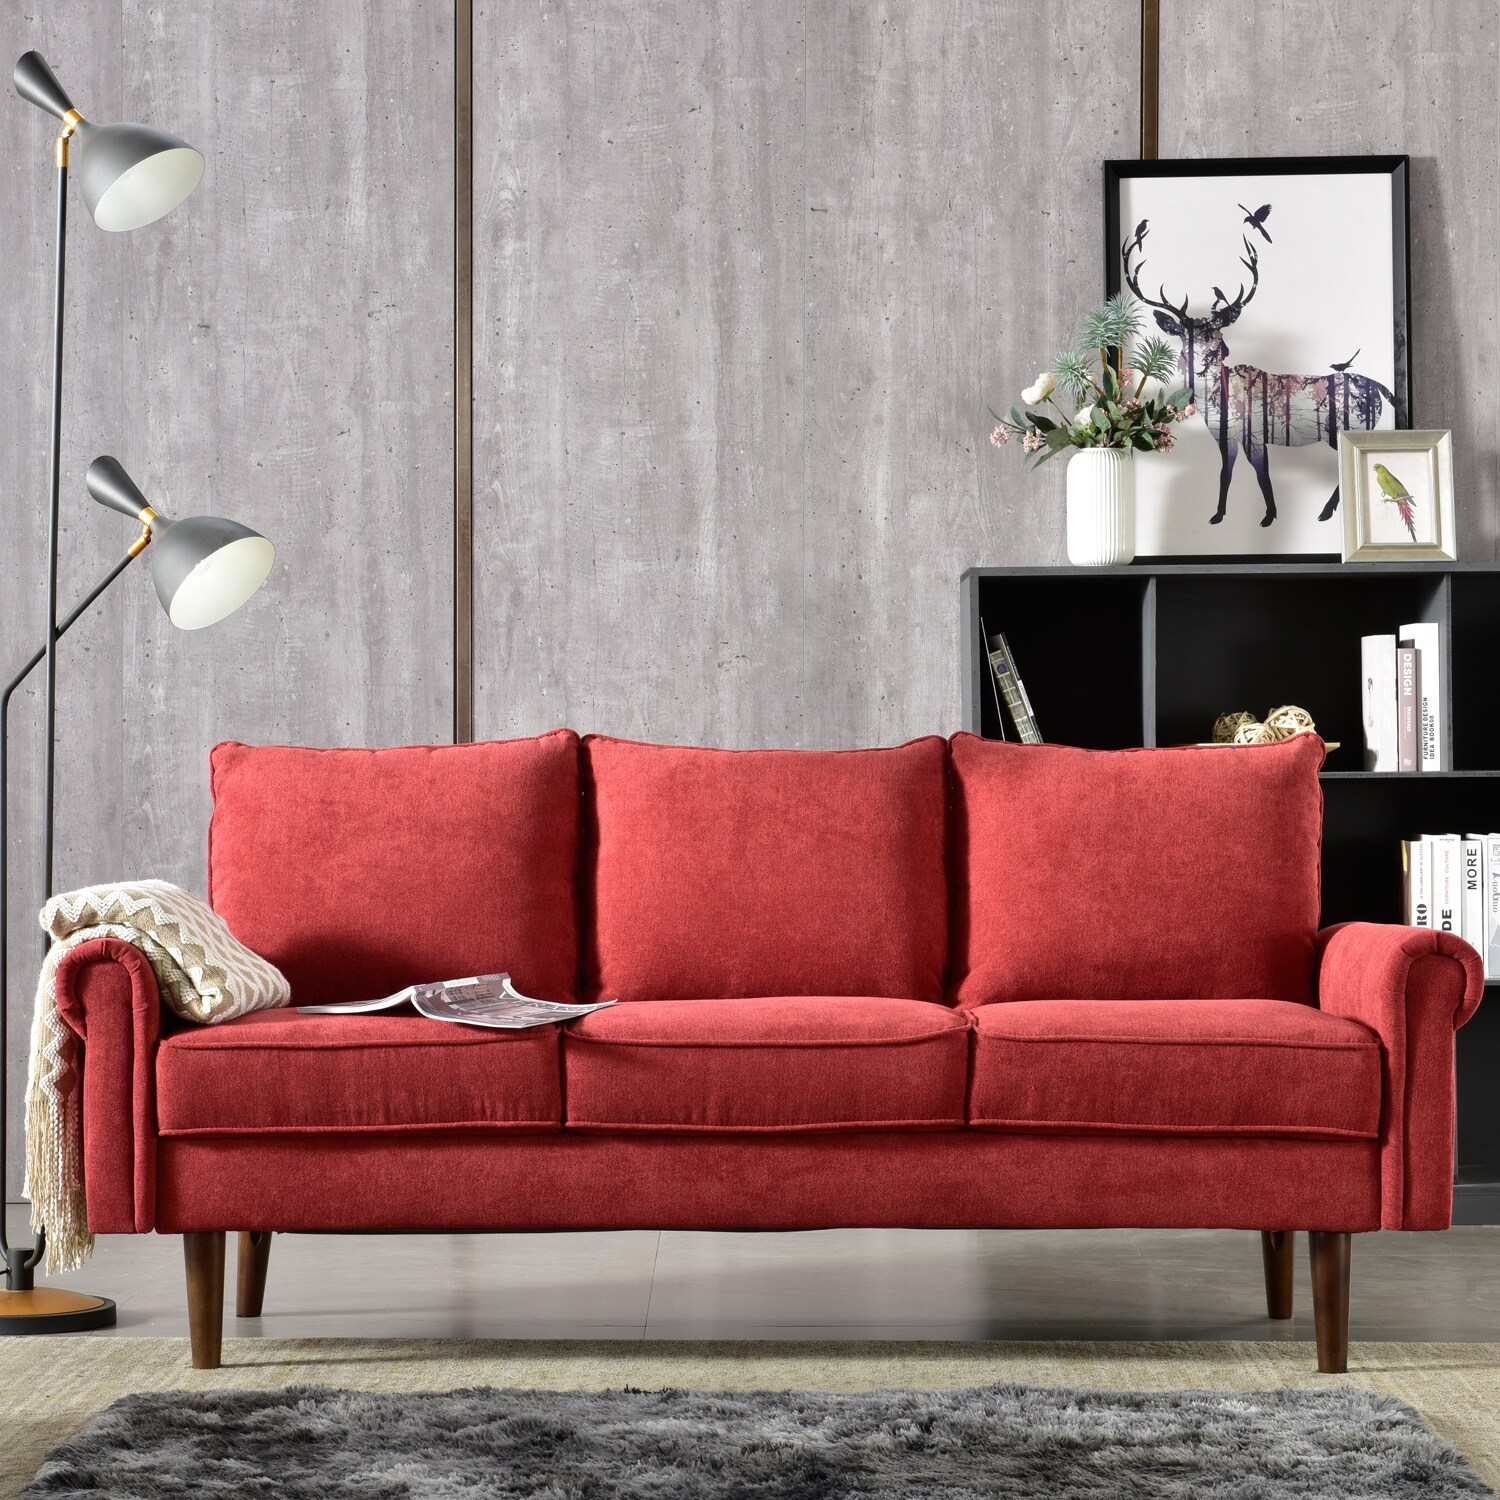 Ovios Modern Red Sofa in the Couches, Sofas & Loveseats department at Lowes.com